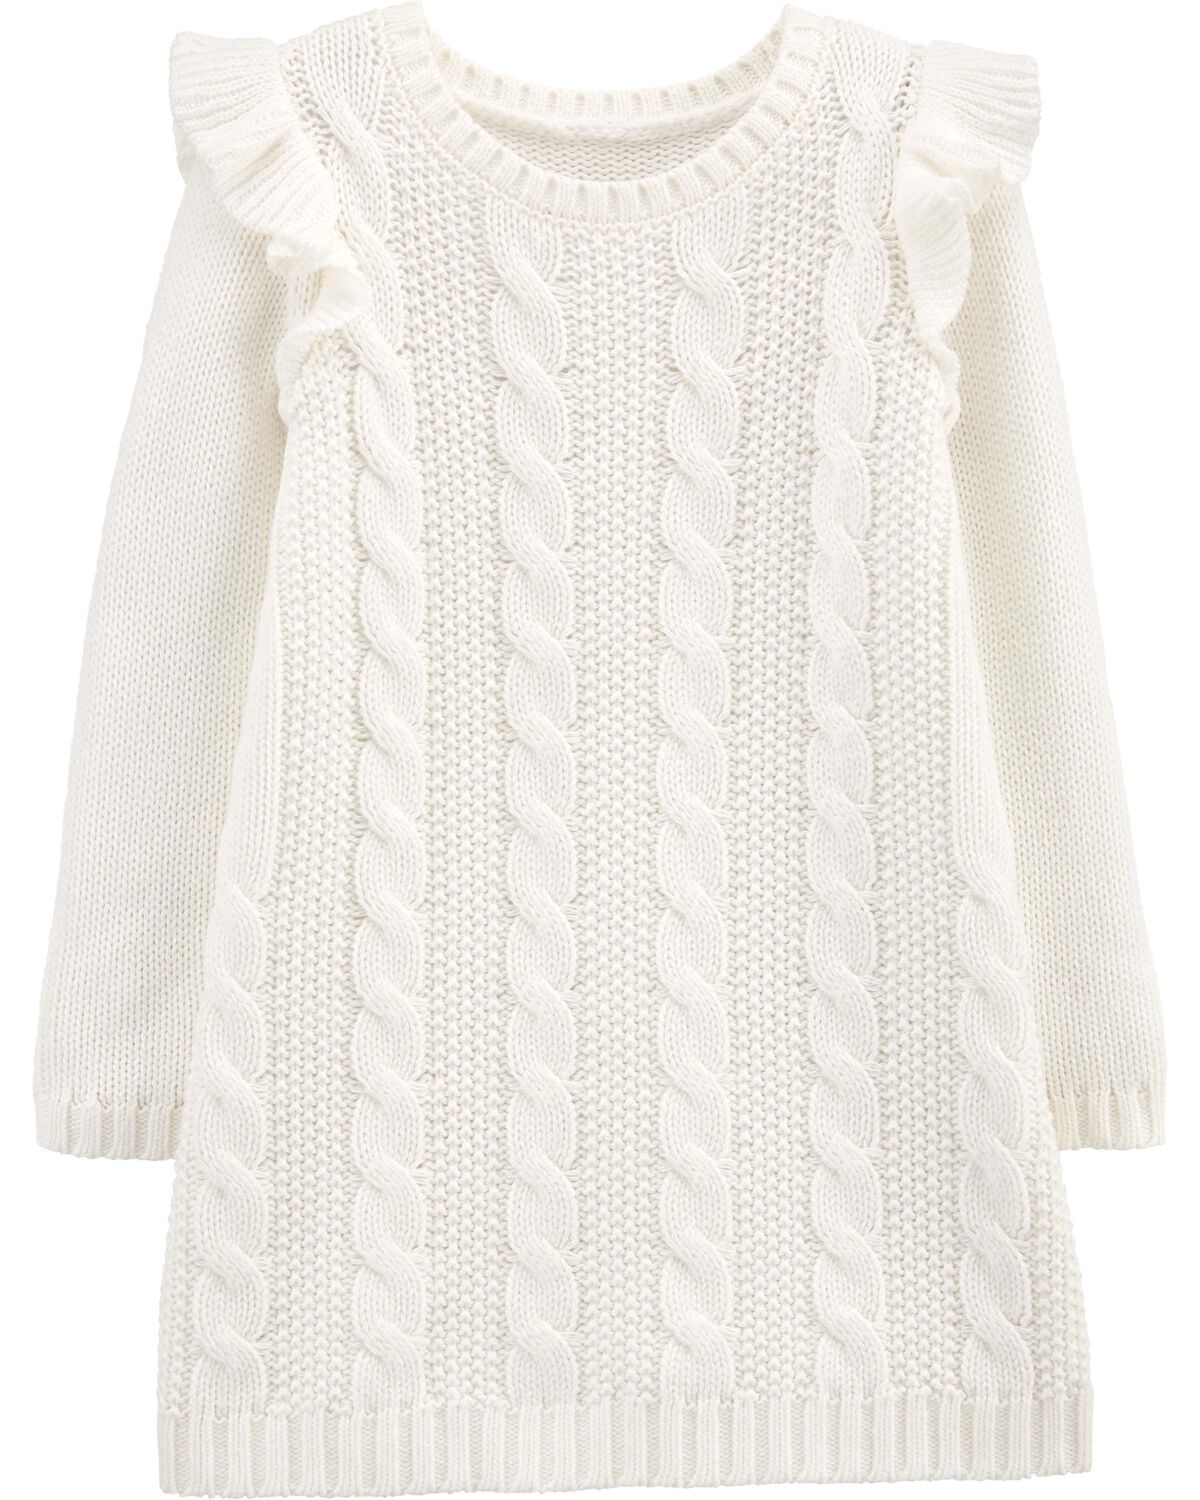 Ivory Cable Knit Sweater Dress | carters.com